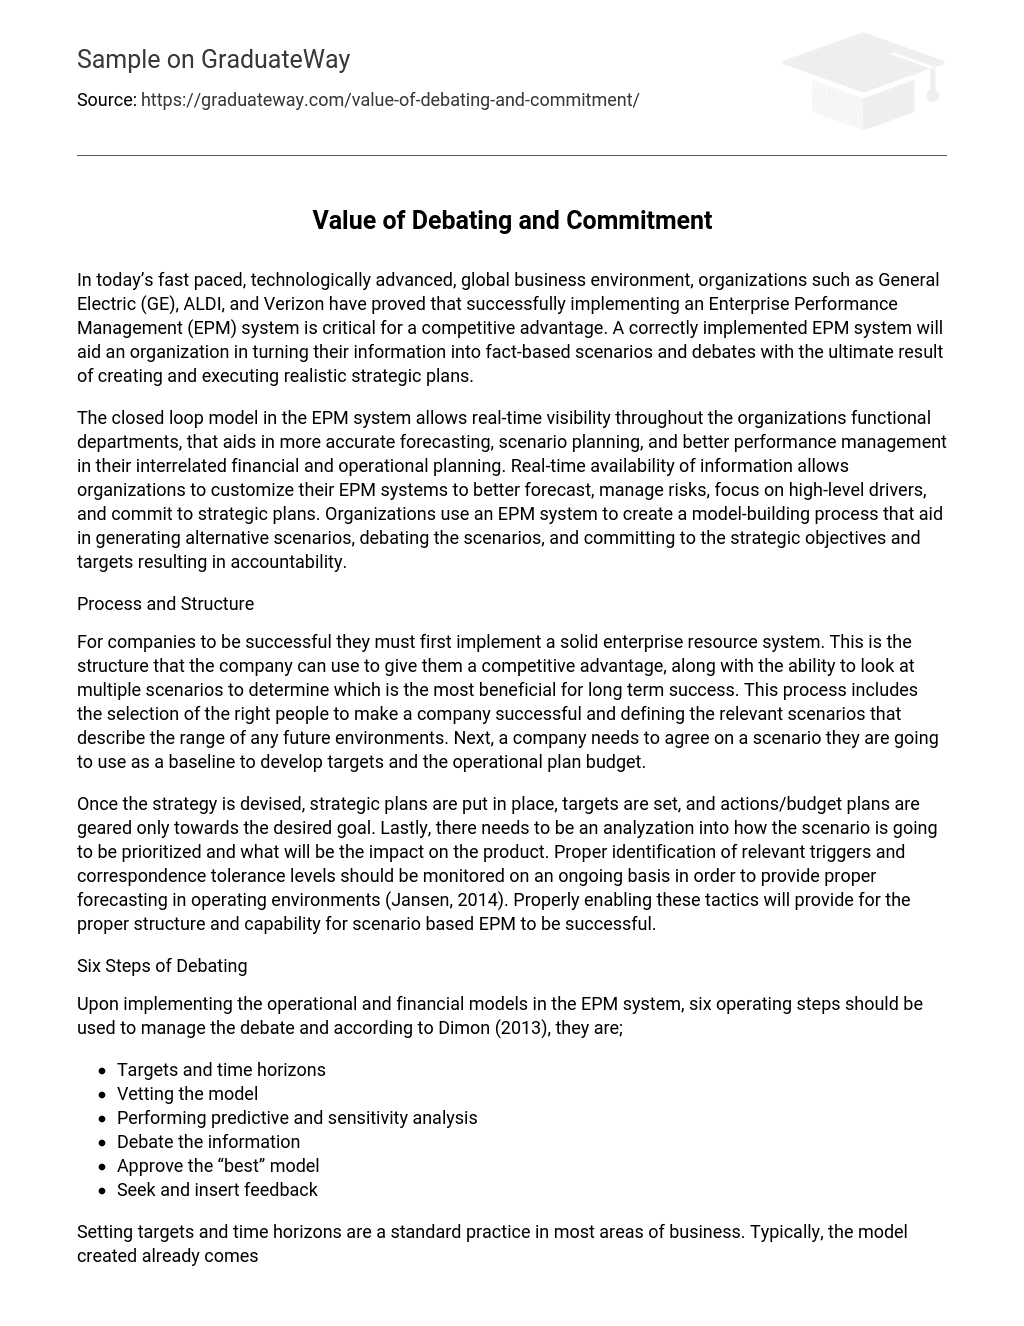 Value of Debating and Commitment